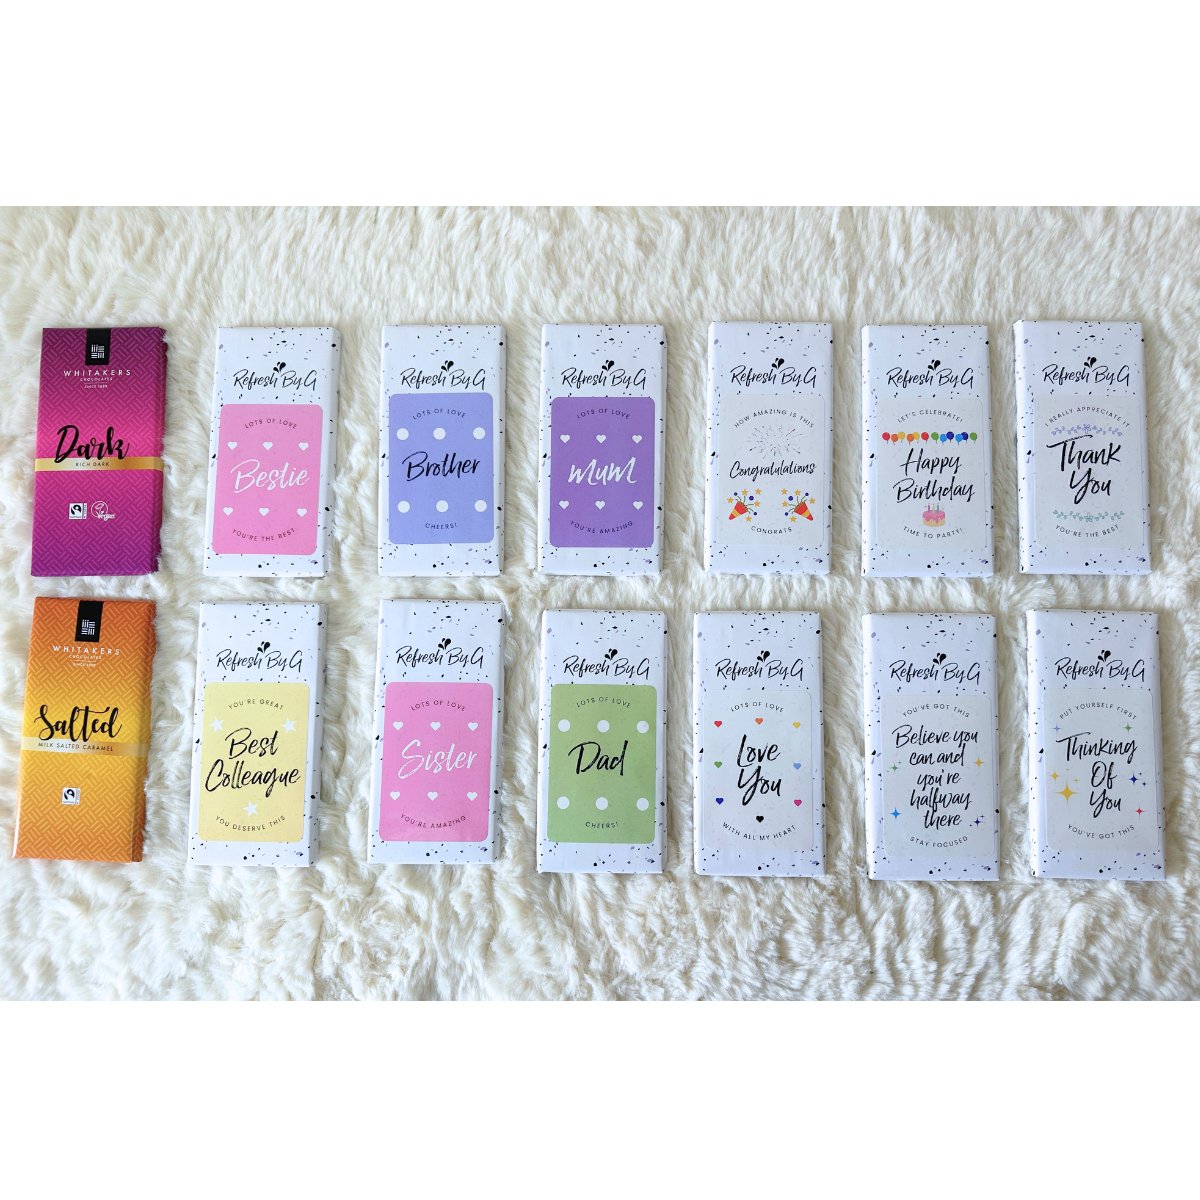 Range of chocolate bars which customers can choose from when they order the Positive Habits Gift Box with James Clear Book